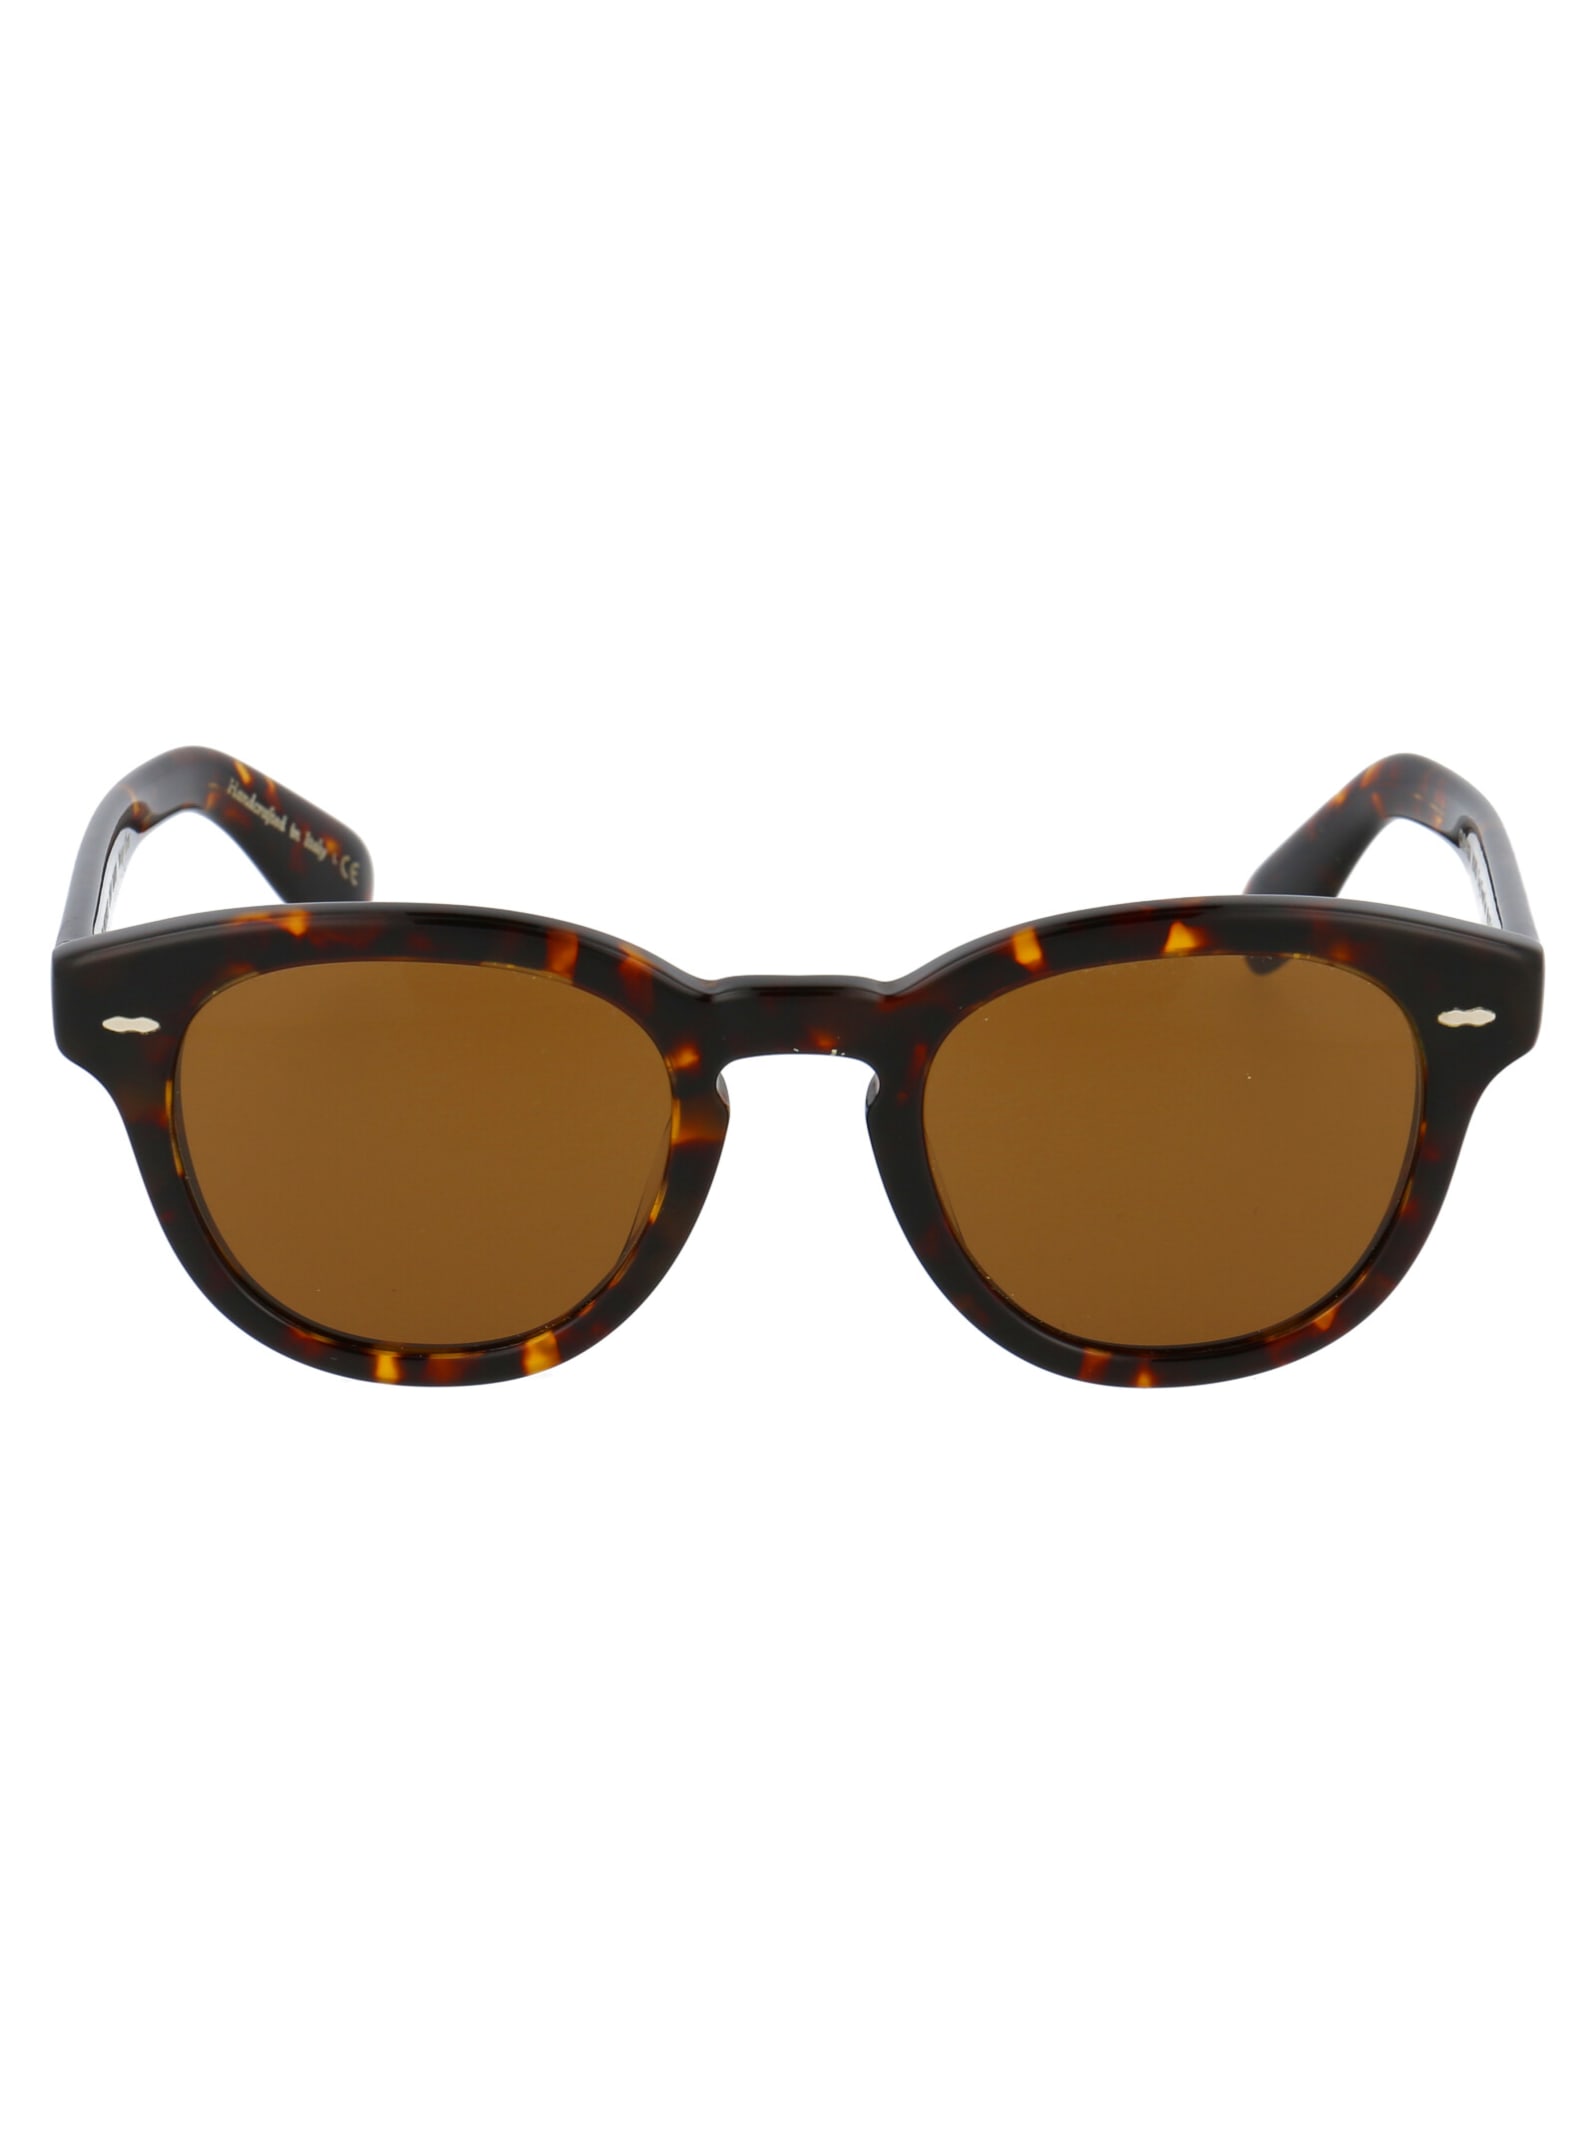 OLIVER PEOPLES CARY GRANT SUN SUNGLASSES,11740215